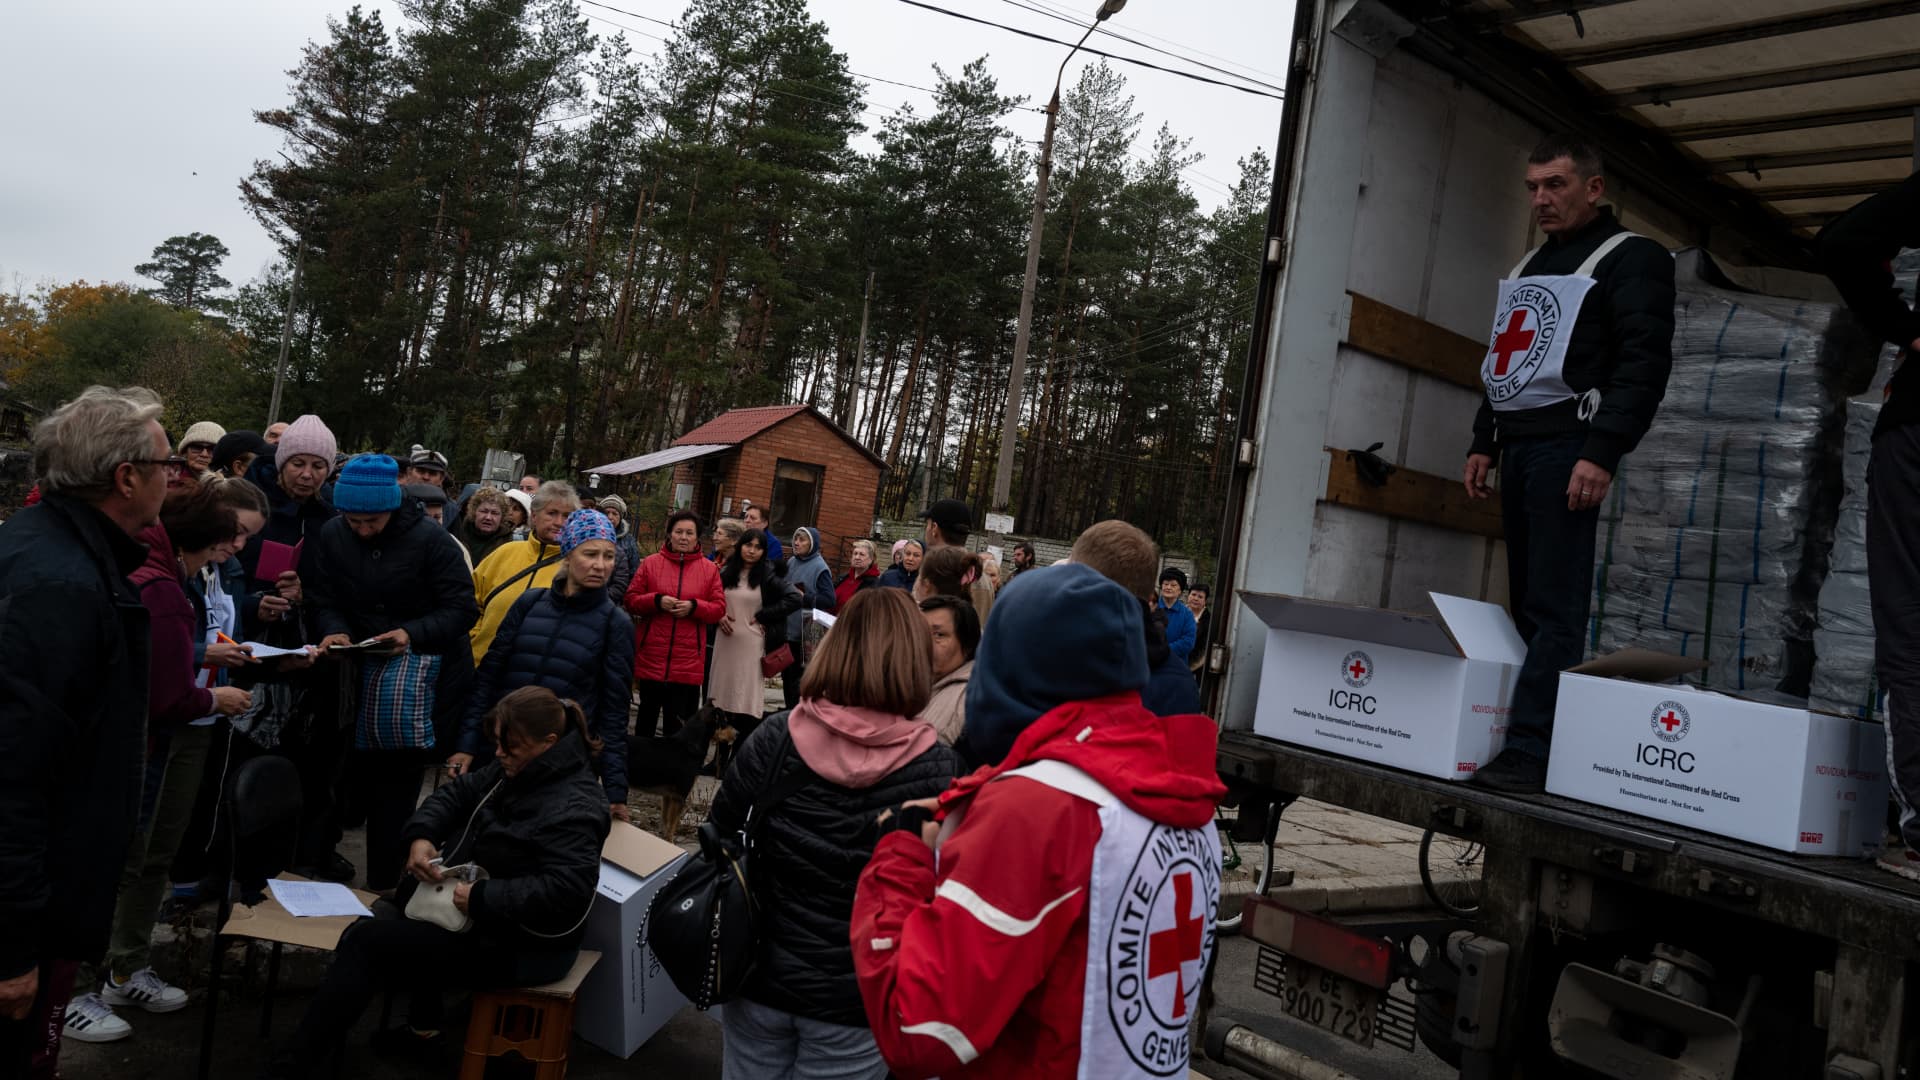 Ukrainian civilians queue for humanitarian aid provided by the Red Cross as people try to survive amid the wave of Russia's missile strikes in Sviatohiersk, Donetsk Oblast, Ukraine on October 20, 2022. 